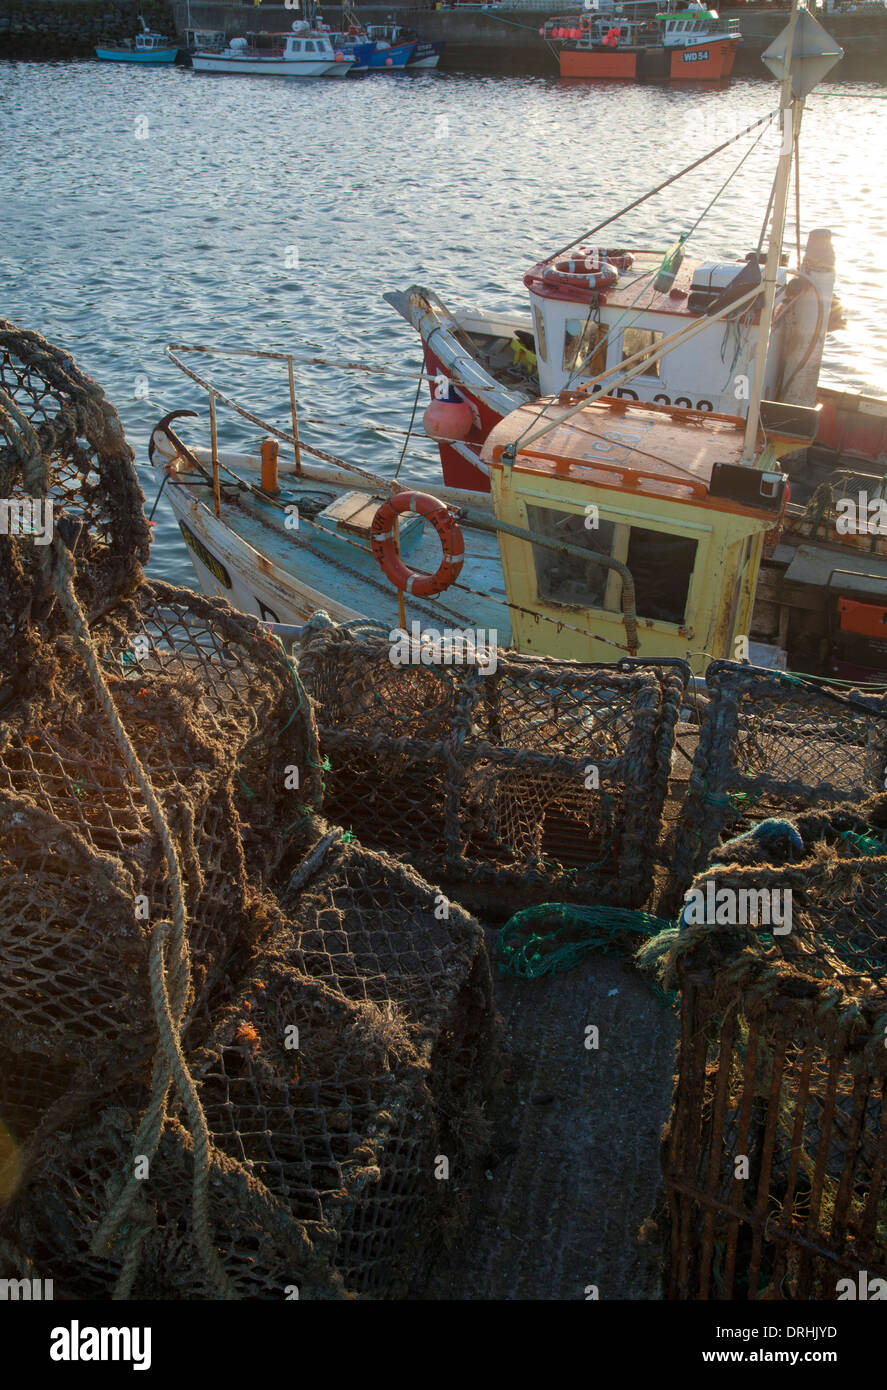 Fishing boats and lobster pots in Howth harbour, County Dublin, Ireland. Stock Photo